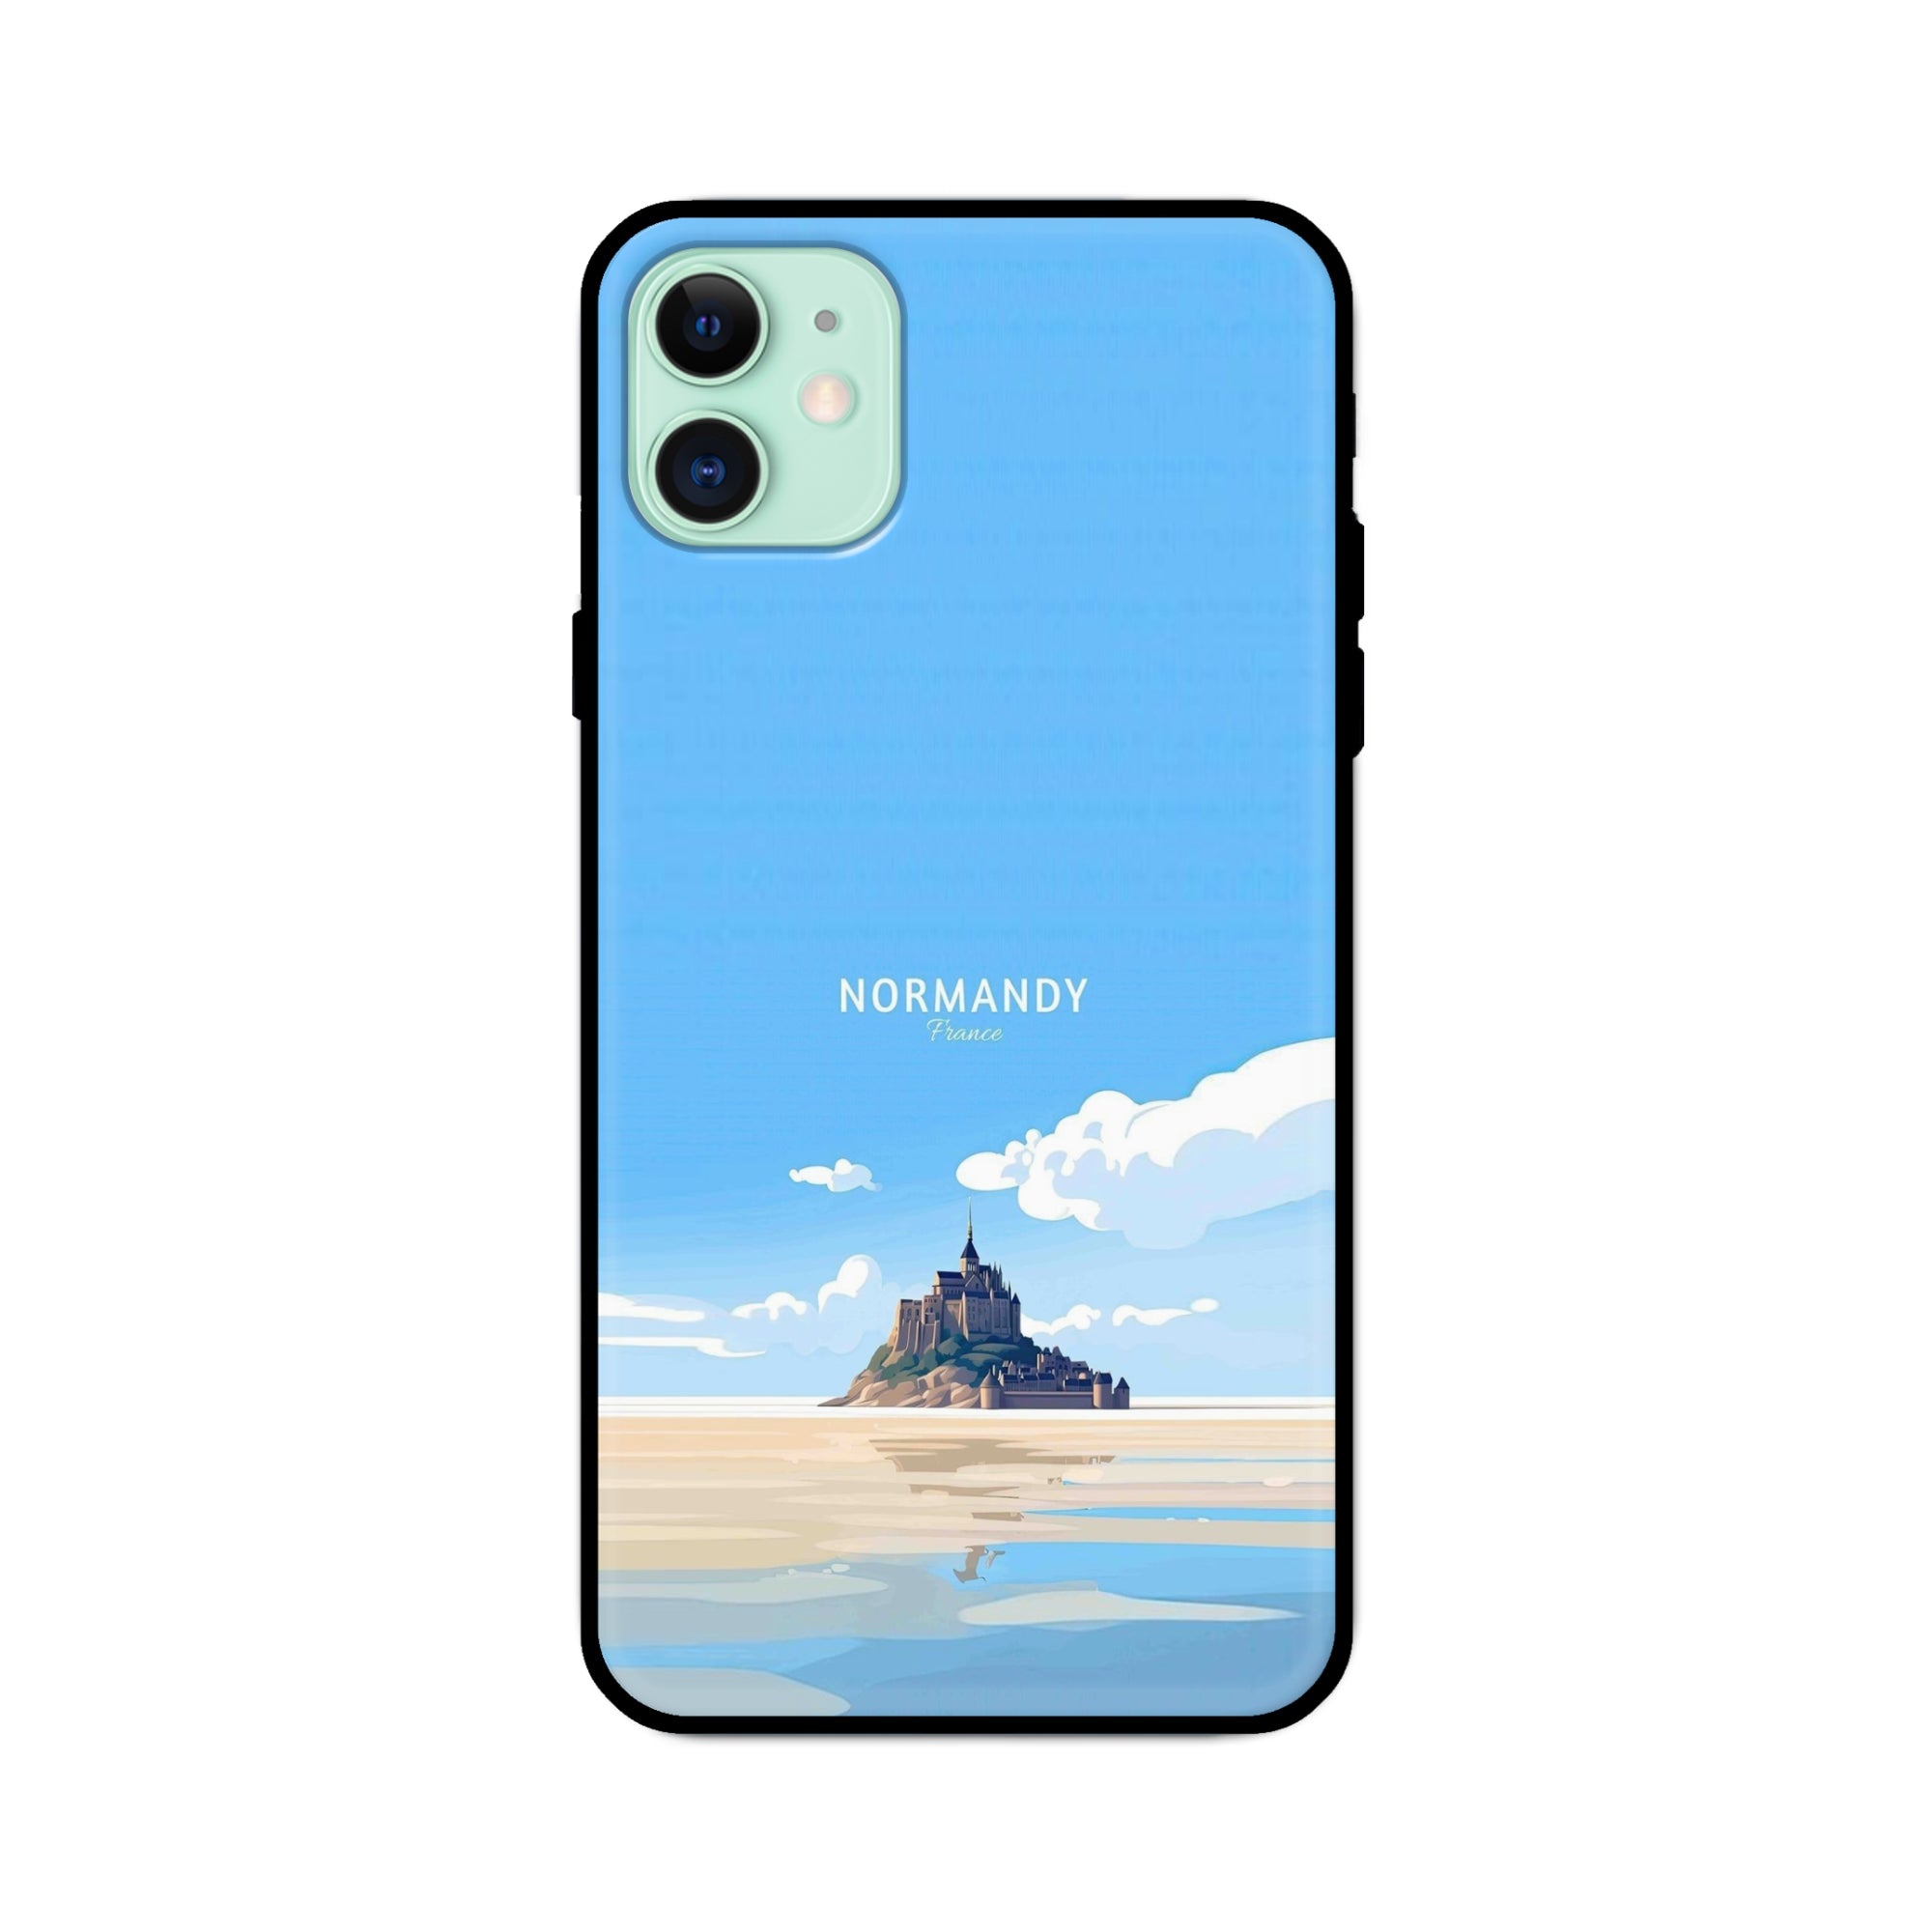 Buy Normandy Glass/Metal Back Mobile Phone Case/Cover For iPhone 11 Online